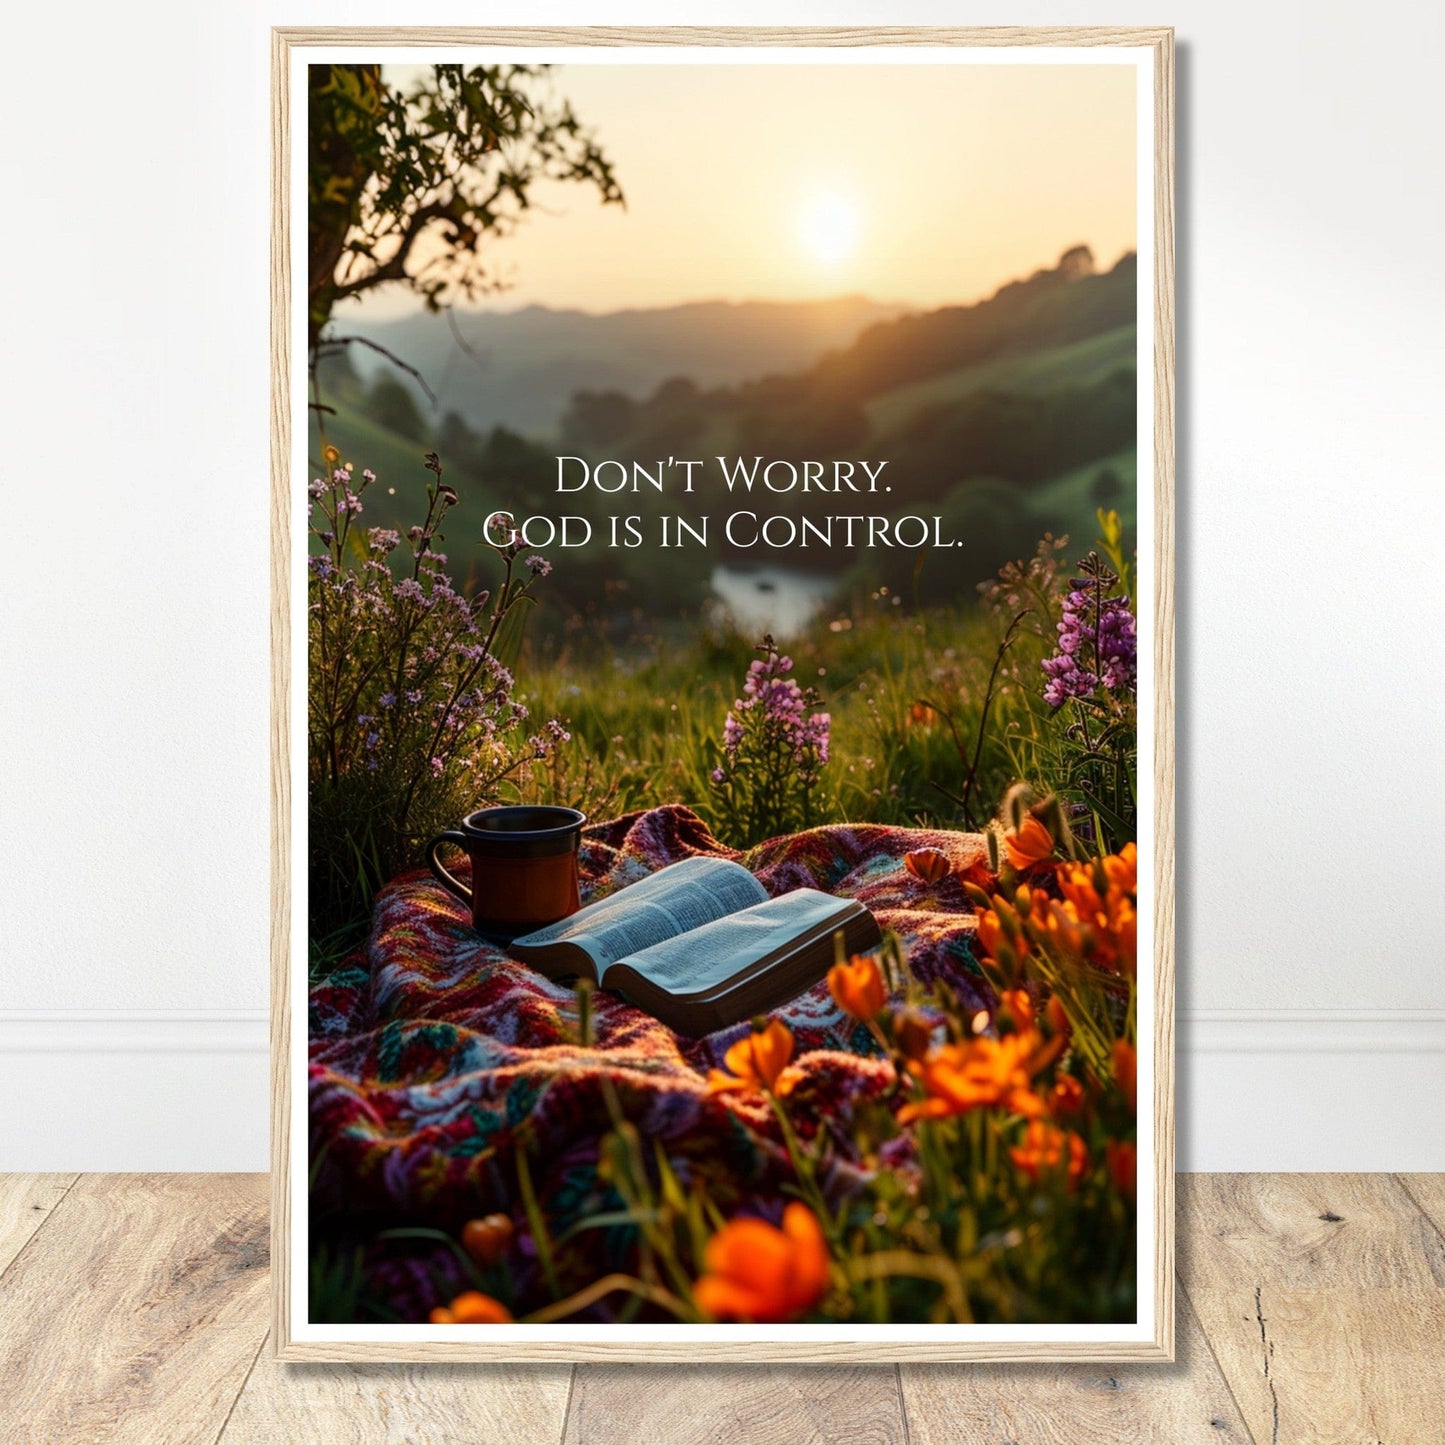 Coffee With My Father Print Material 60x90 cm / 24x36″ / Wood frame Premium Matte Paper Wooden Framed Poster